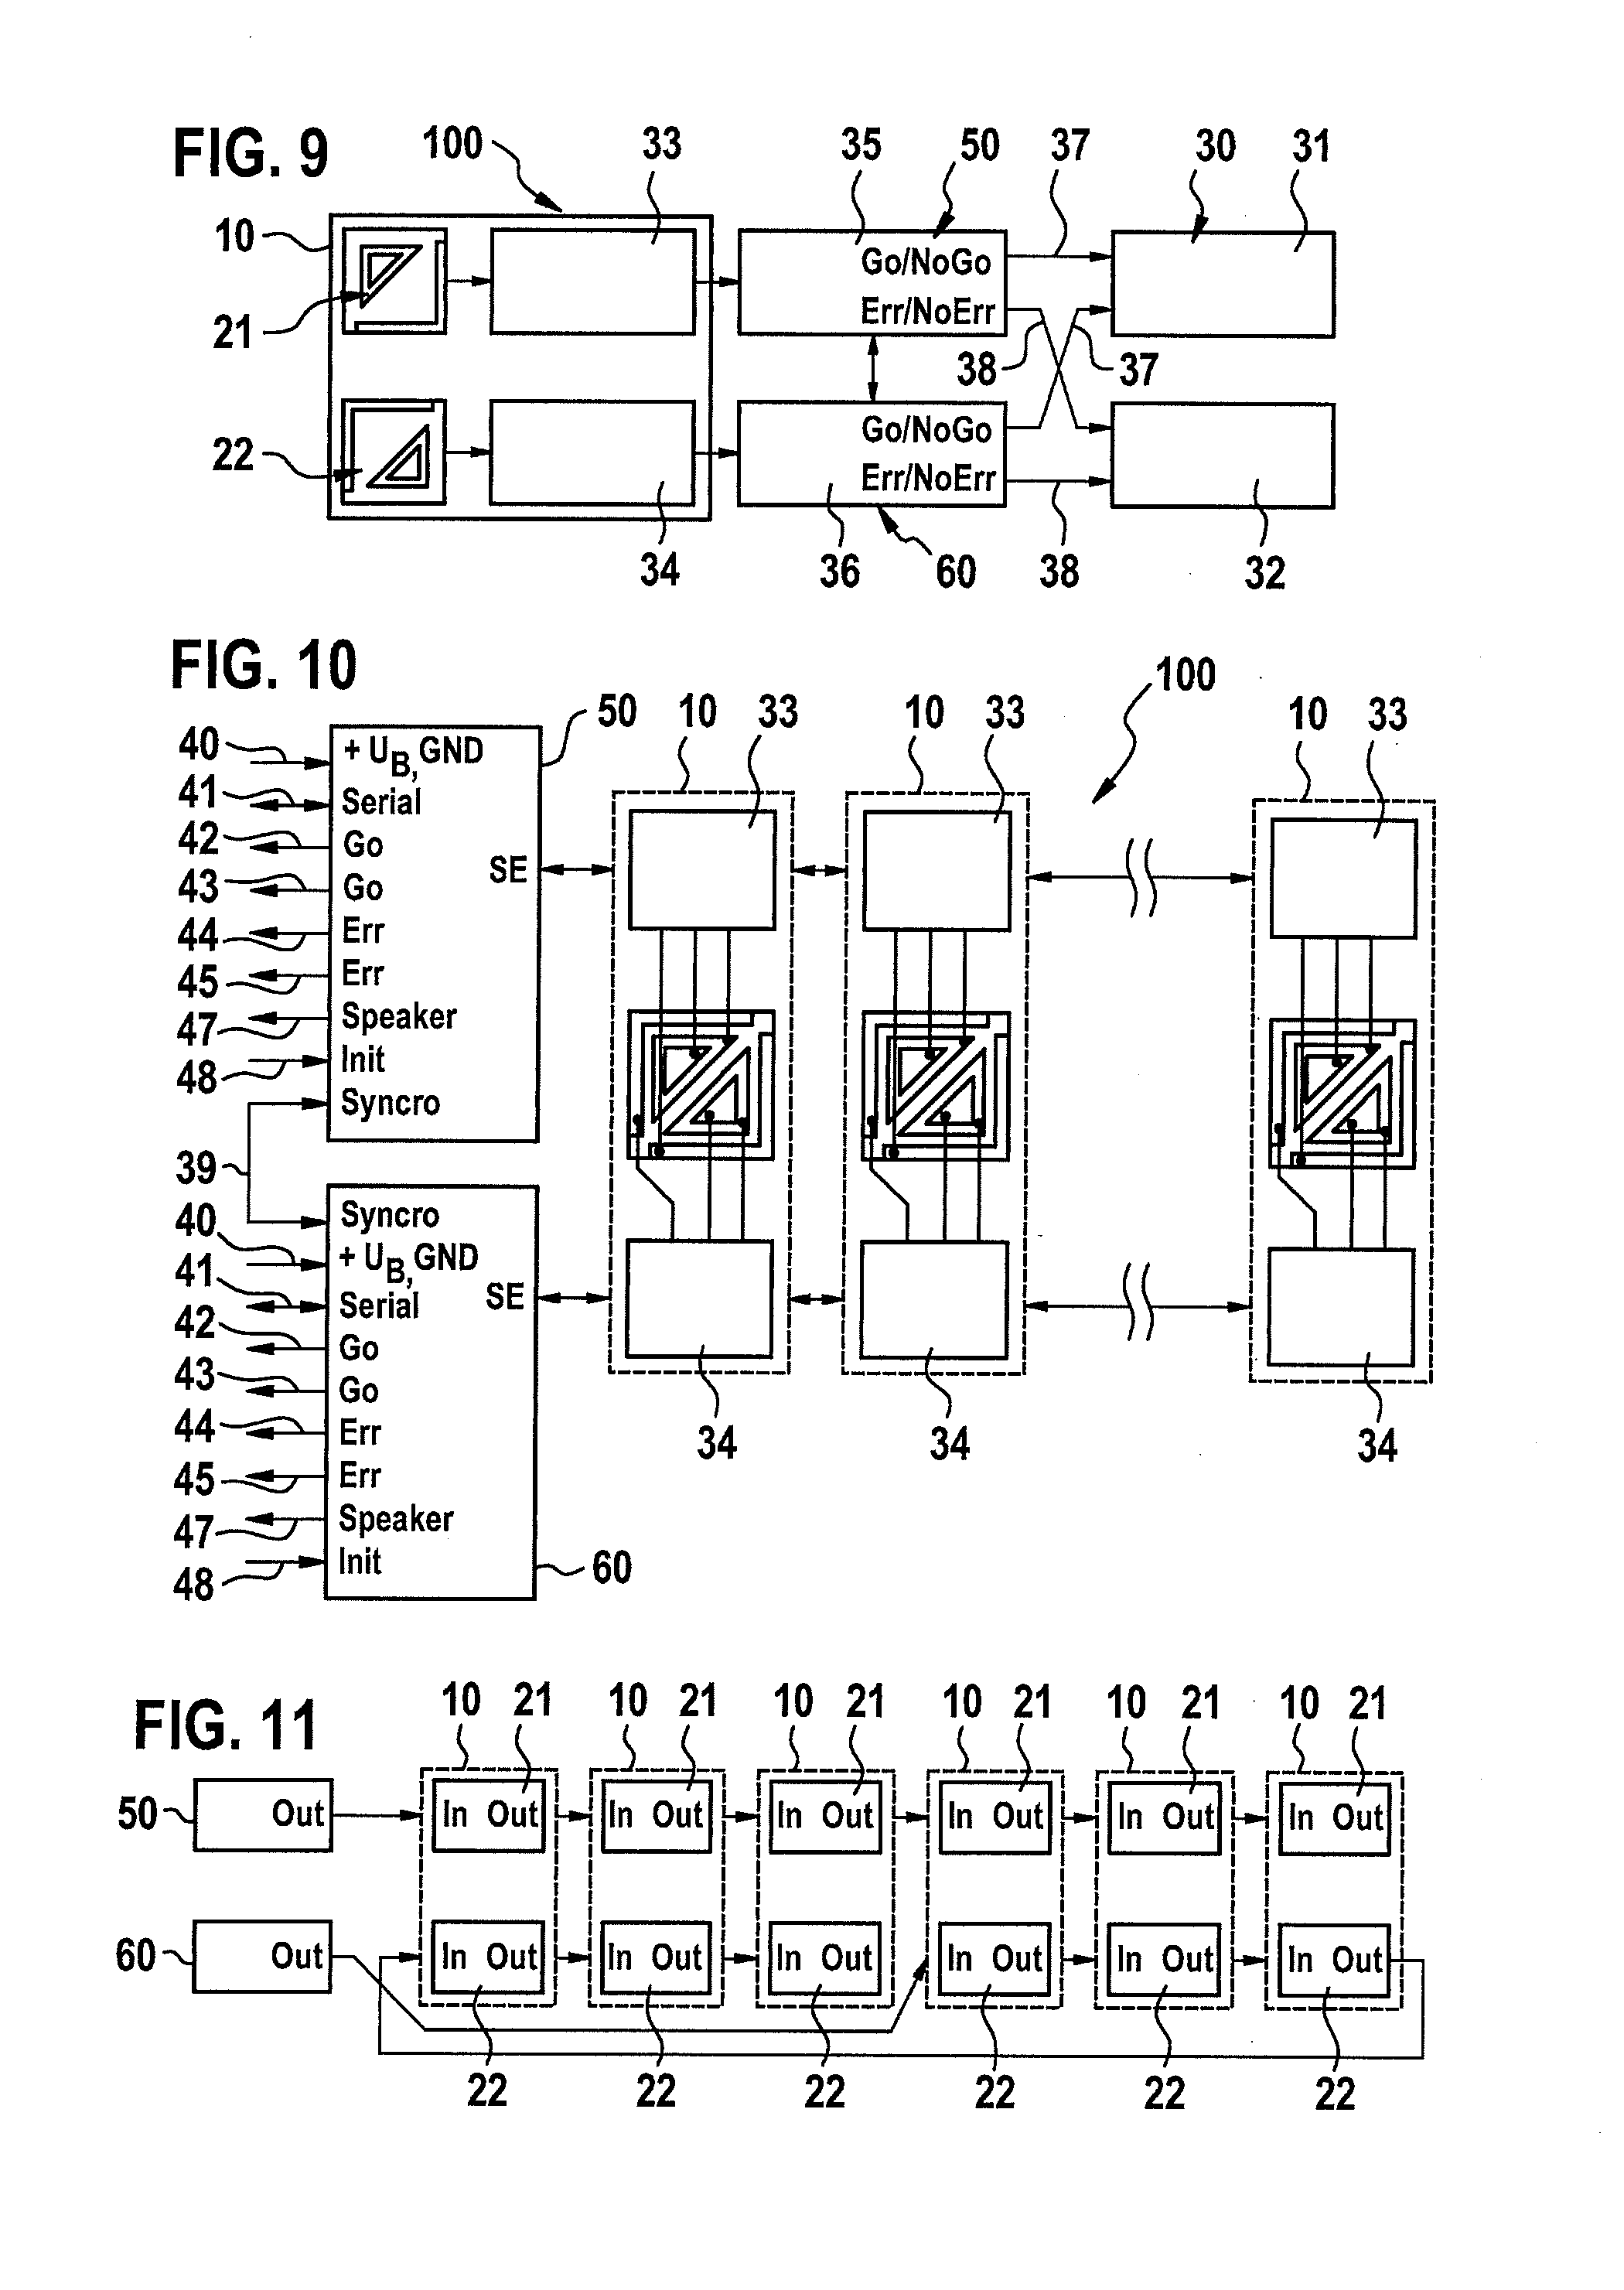 Sensor system for monitoring surroundings on a mechanical component, and method for actuating and evaluating the sensor system